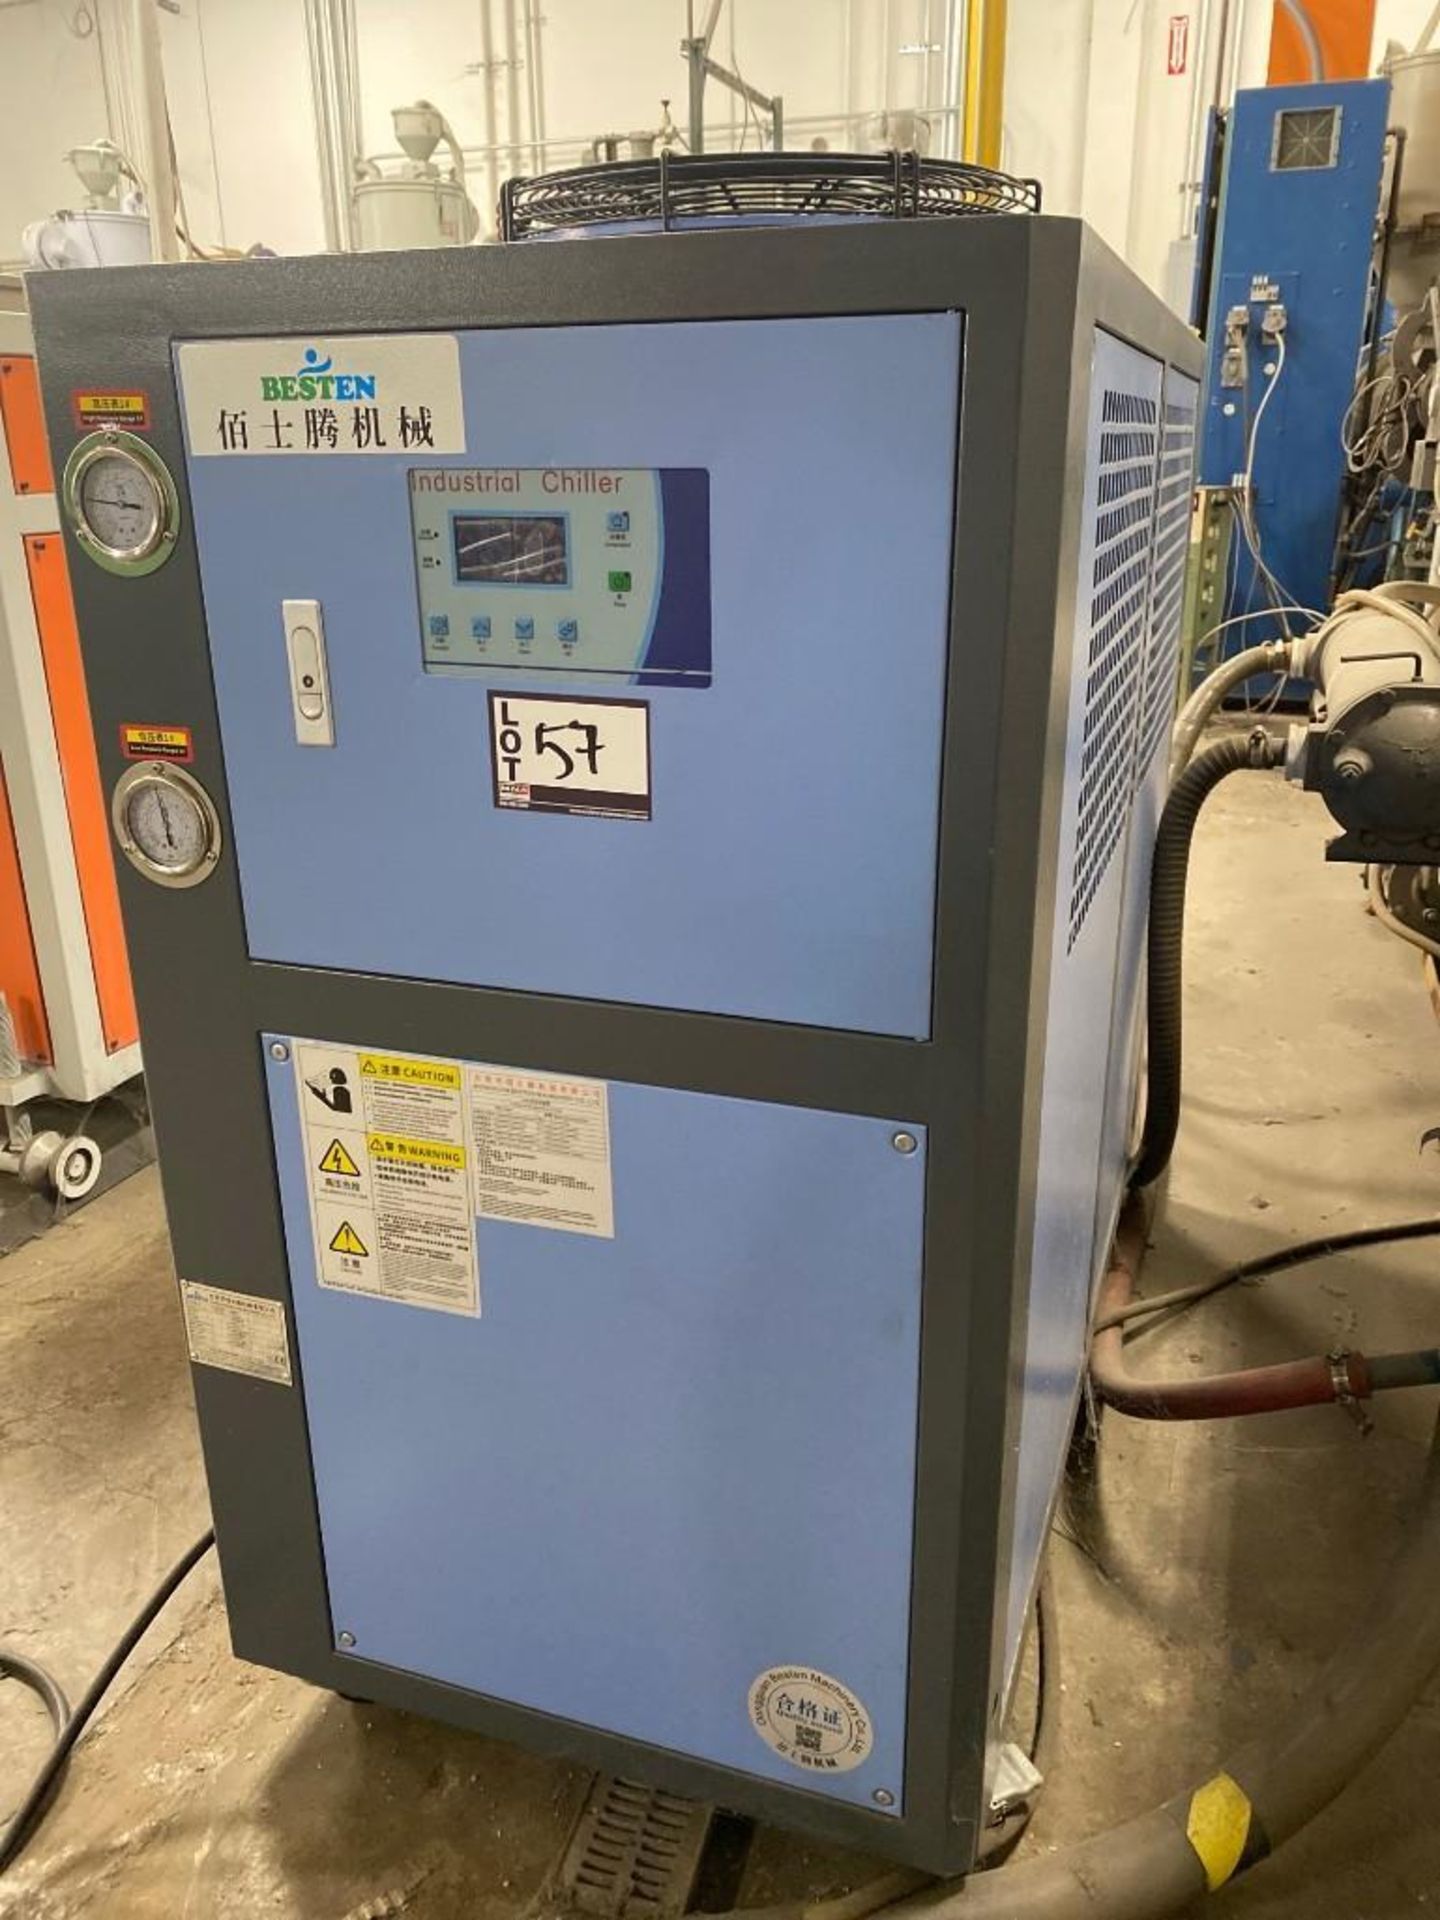 Besten 05AC Air Cooled Chiller, s/n 1908128, New 2019 - Image 2 of 3